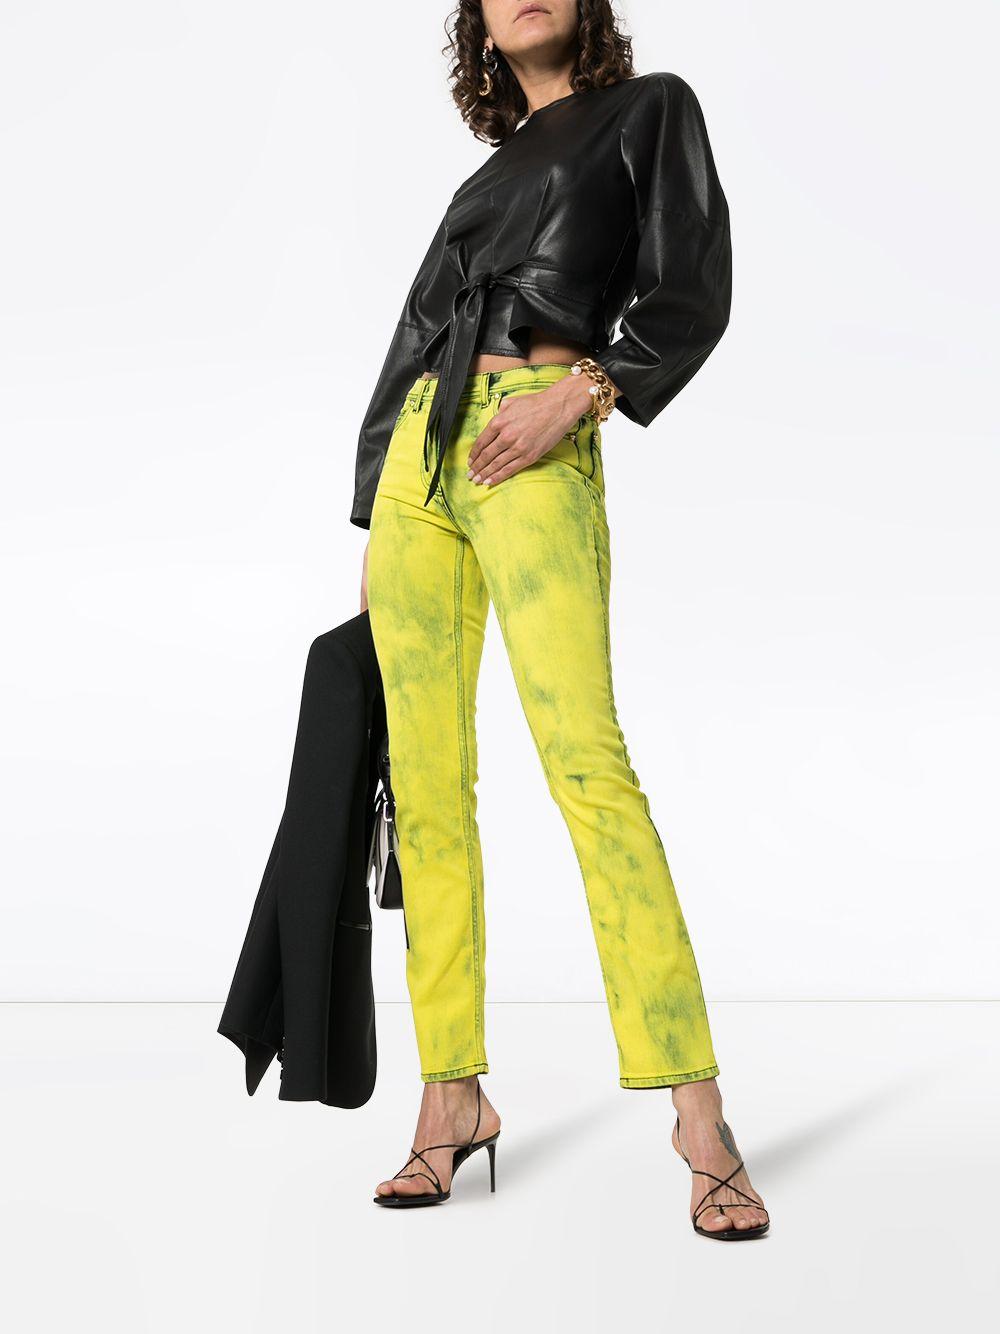 Versace Yellow Acid Wash Denim Skinny Jeans with Logo Label

These Versace acid yellow Versace acid wash logo label skinny jeans are expertly crafted in Italy from stretch denim, showcasing the standard trouser fly and button fastening with belt